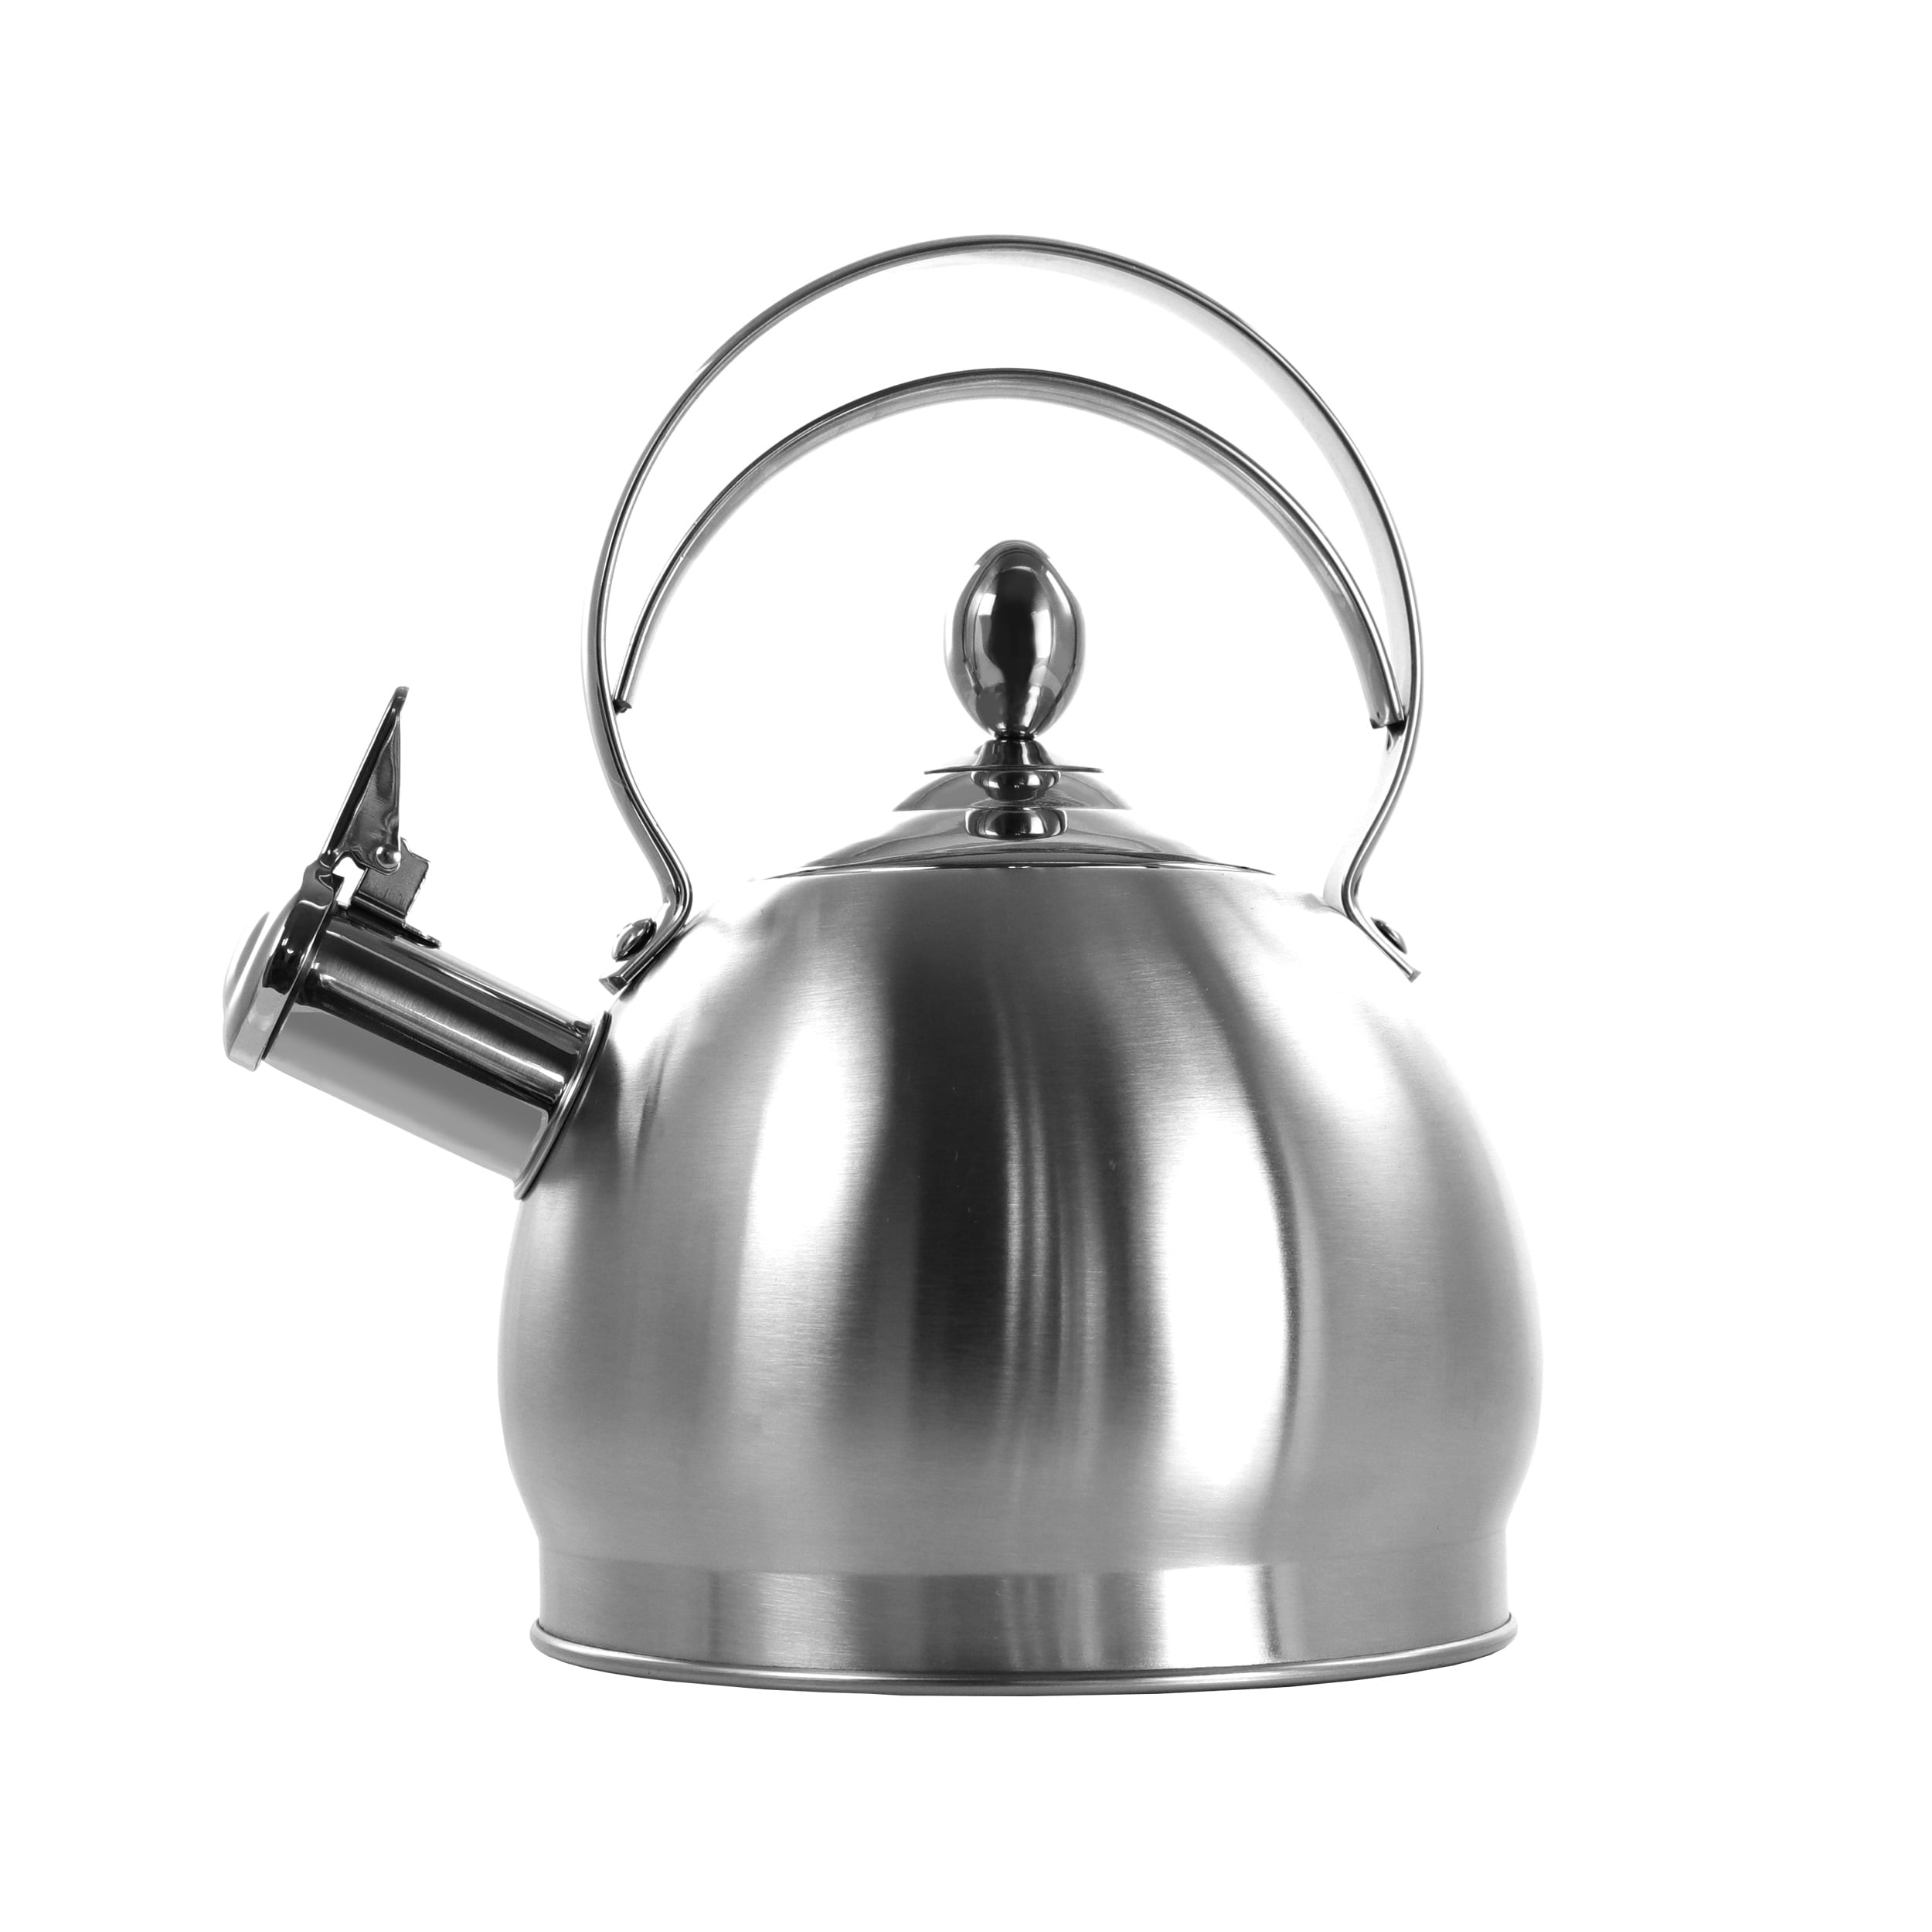 MegaChef 3 Liter Stovetop Whistling Kettle in Red - 9844605